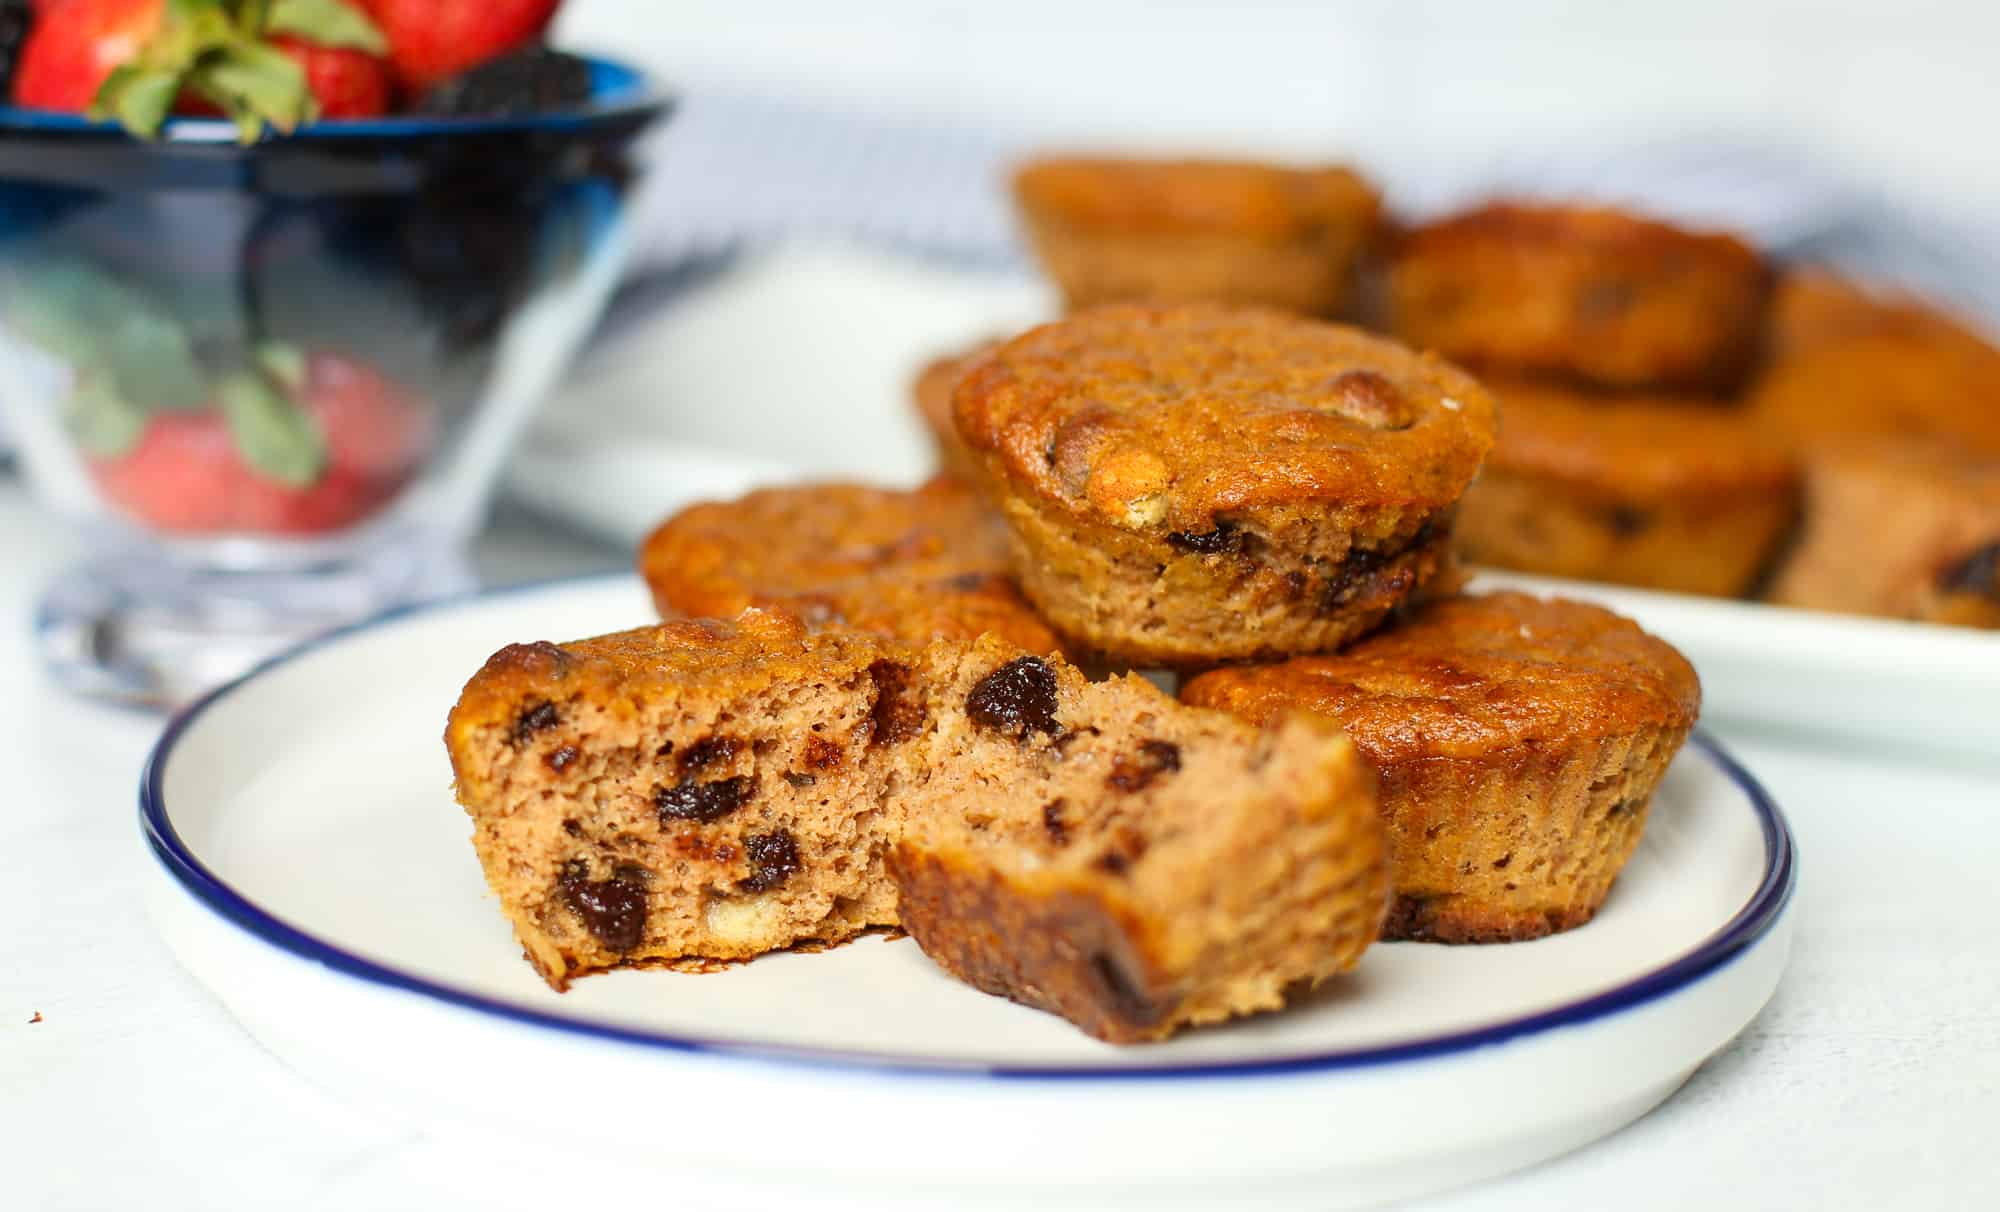 Gluten-free pumpkin chocolate chip muffins stacked on a plate.